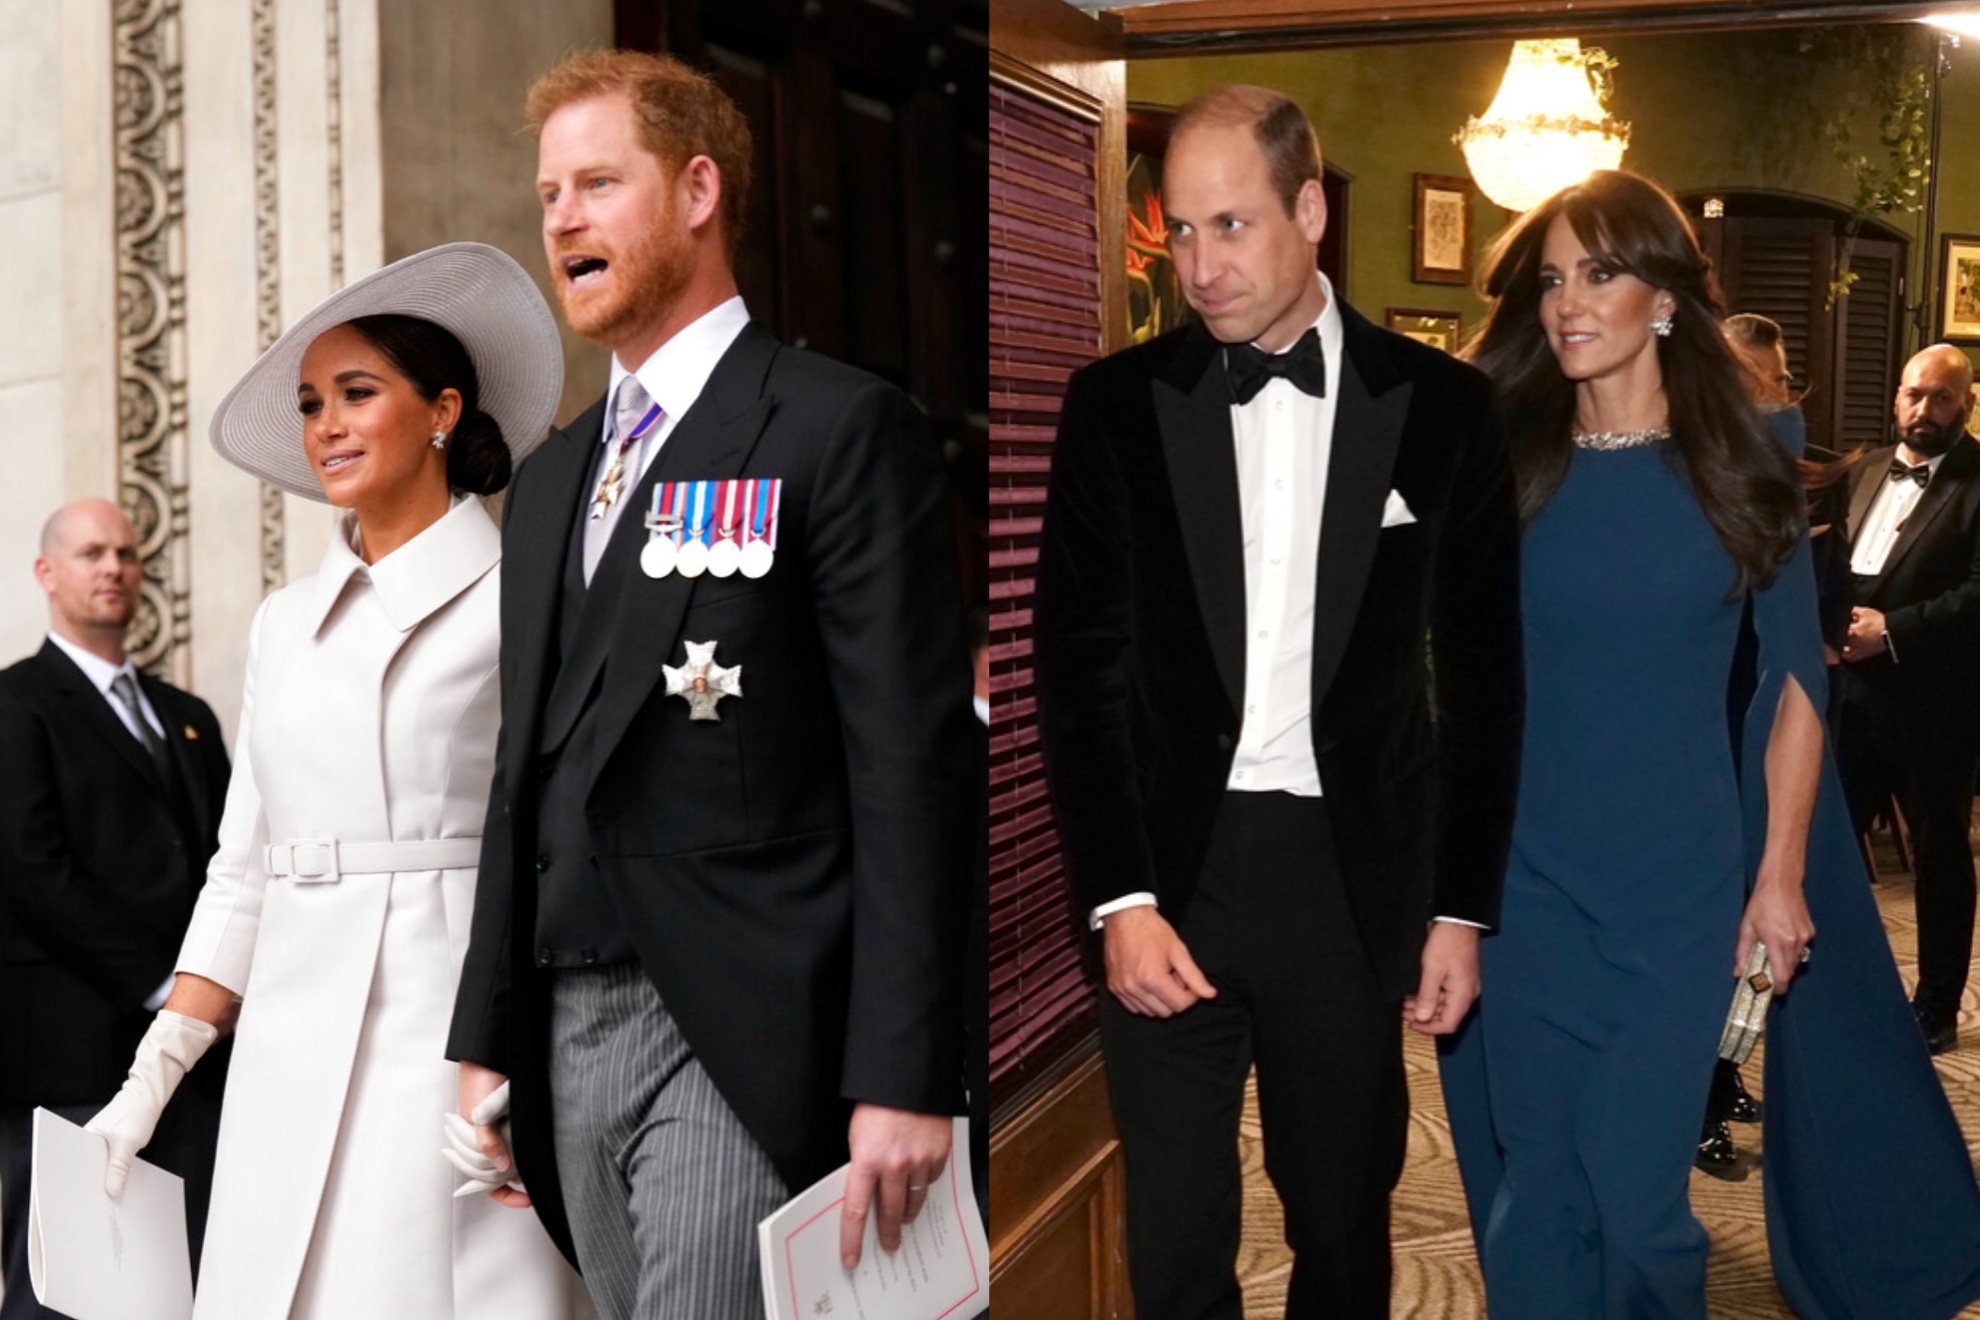 Would the Duke and Duchess of Sussex be seeking a reconciliation with the Prince and Princess of Wales?